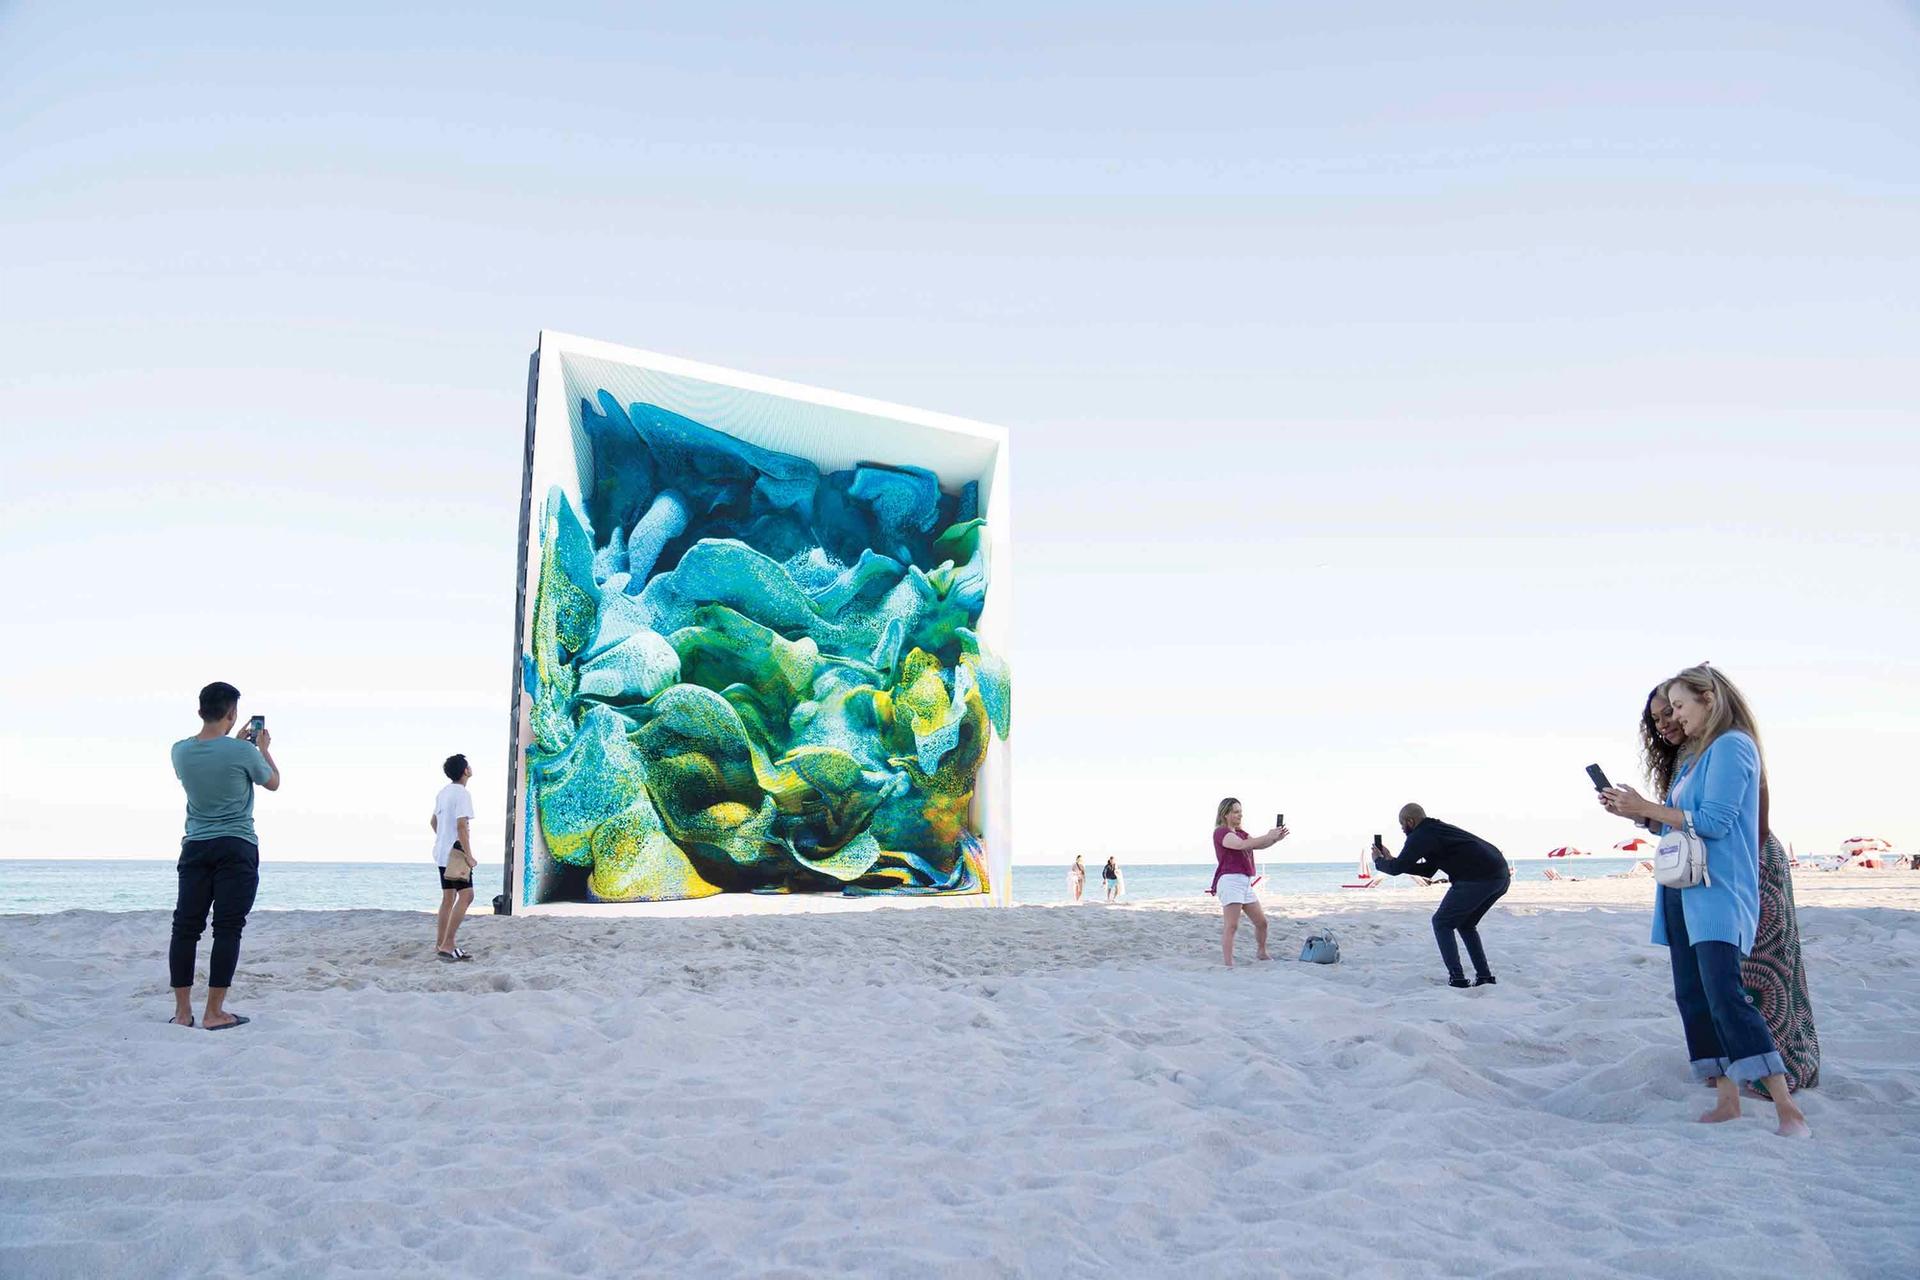 Refik Anadol’s Machine Hallucinations—Coral Dreams (2021) is part of an exhibition by the NFT marketplace Aorist; an auction of corresponding NFTs will raise money for The ReefLine, a new underwater public sculpture park off Miami Beach